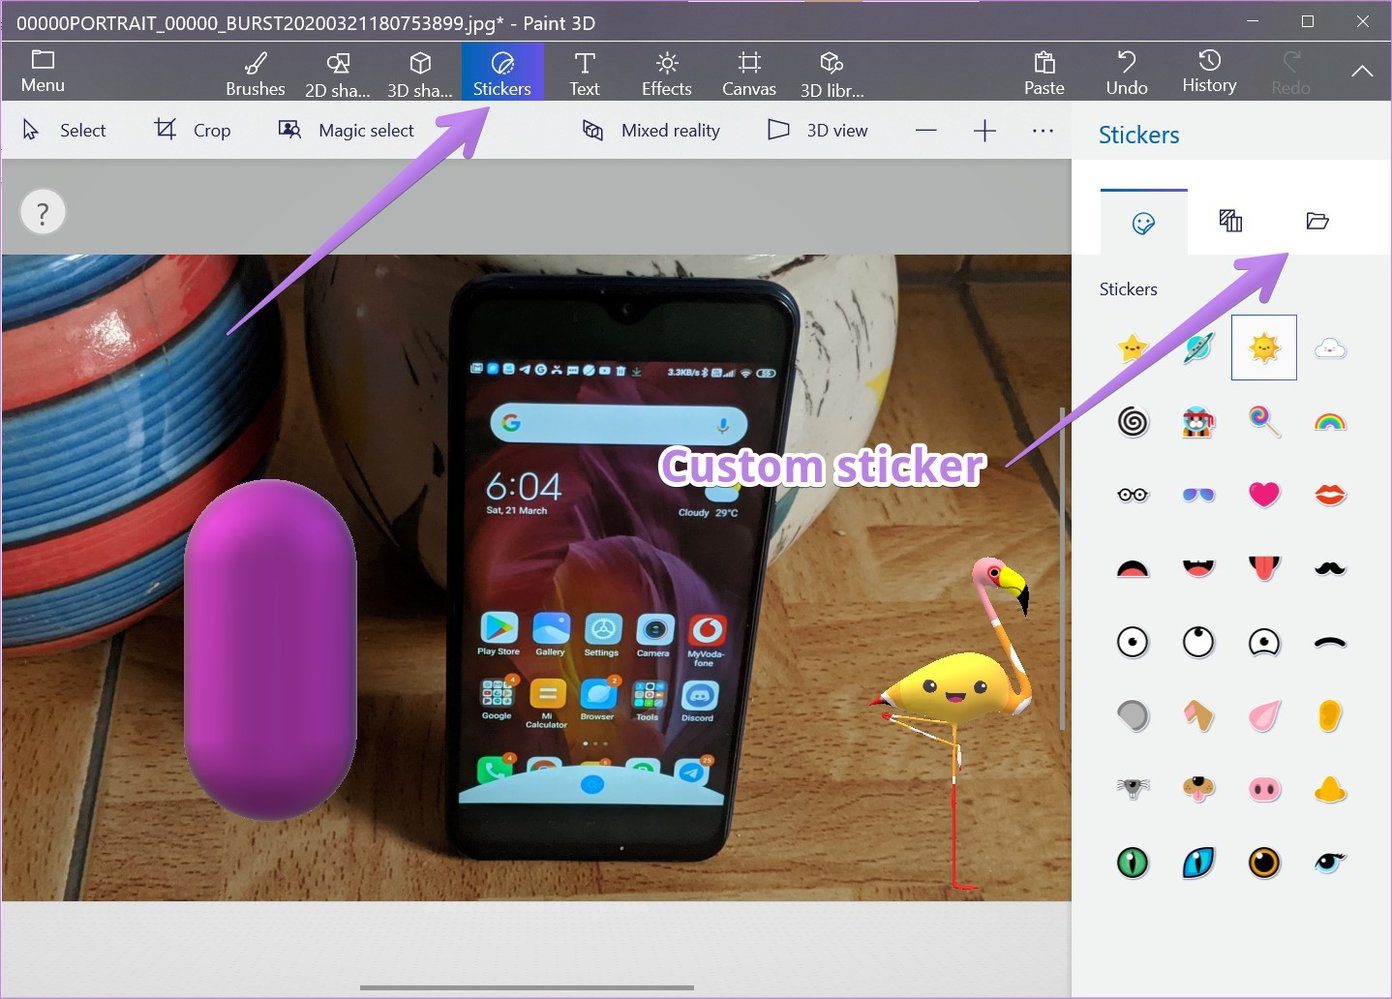 How to use paint 3d to edit photos 17